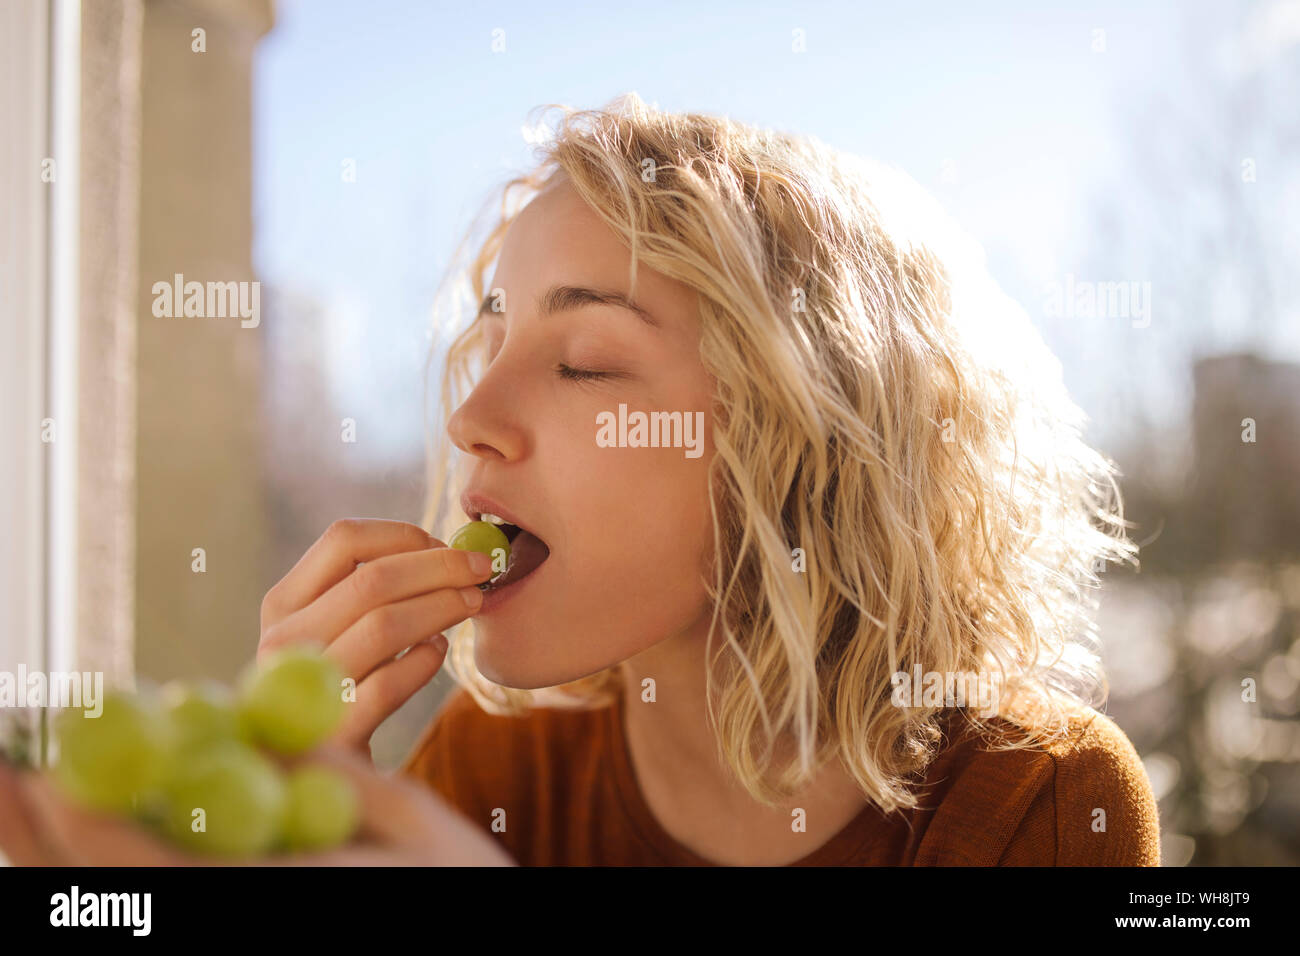 Portrait of blond young woman eating green grapes Stock Photo